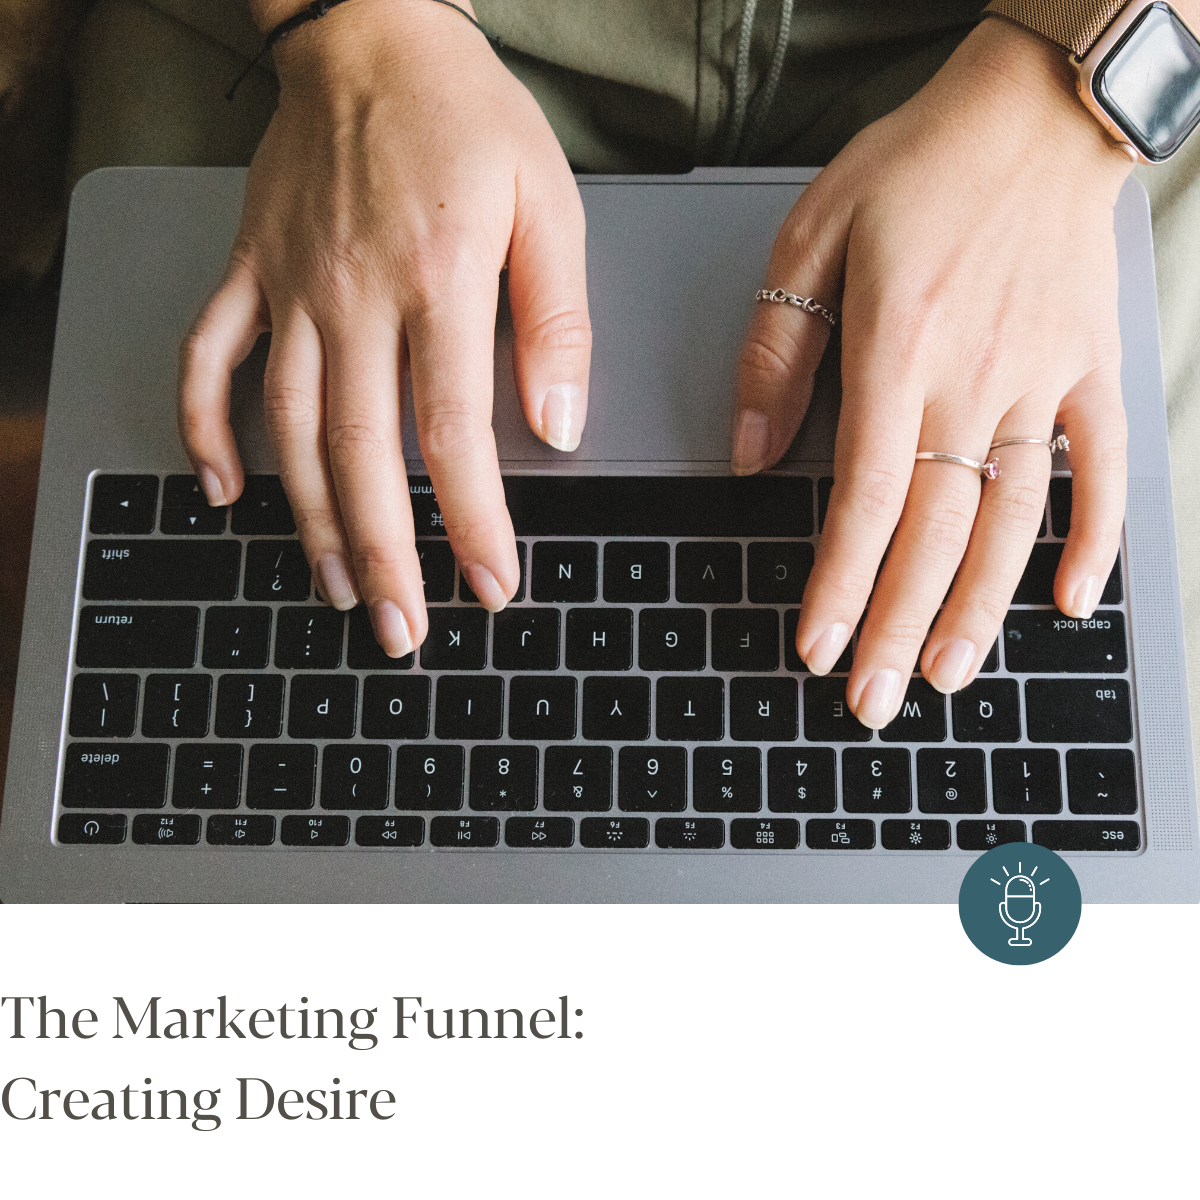 Episode #260 - The Marketing Funnel: Creating Desire